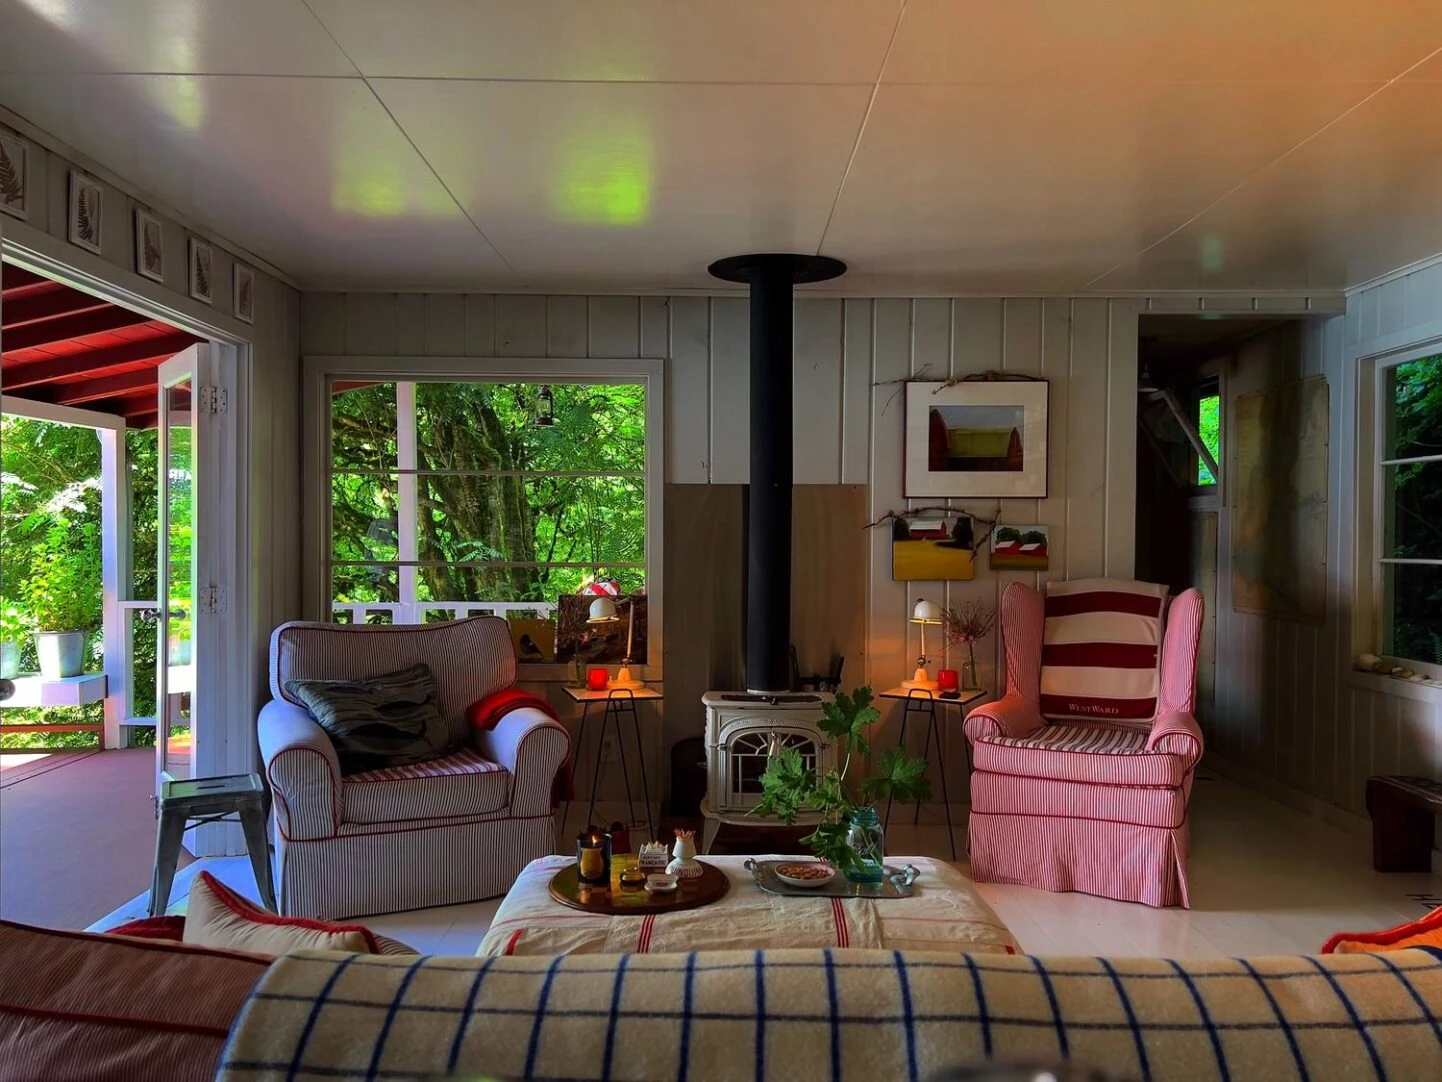 Ted Kennedy Watson and Ted Sive's Vashon island cottage via Quintessence